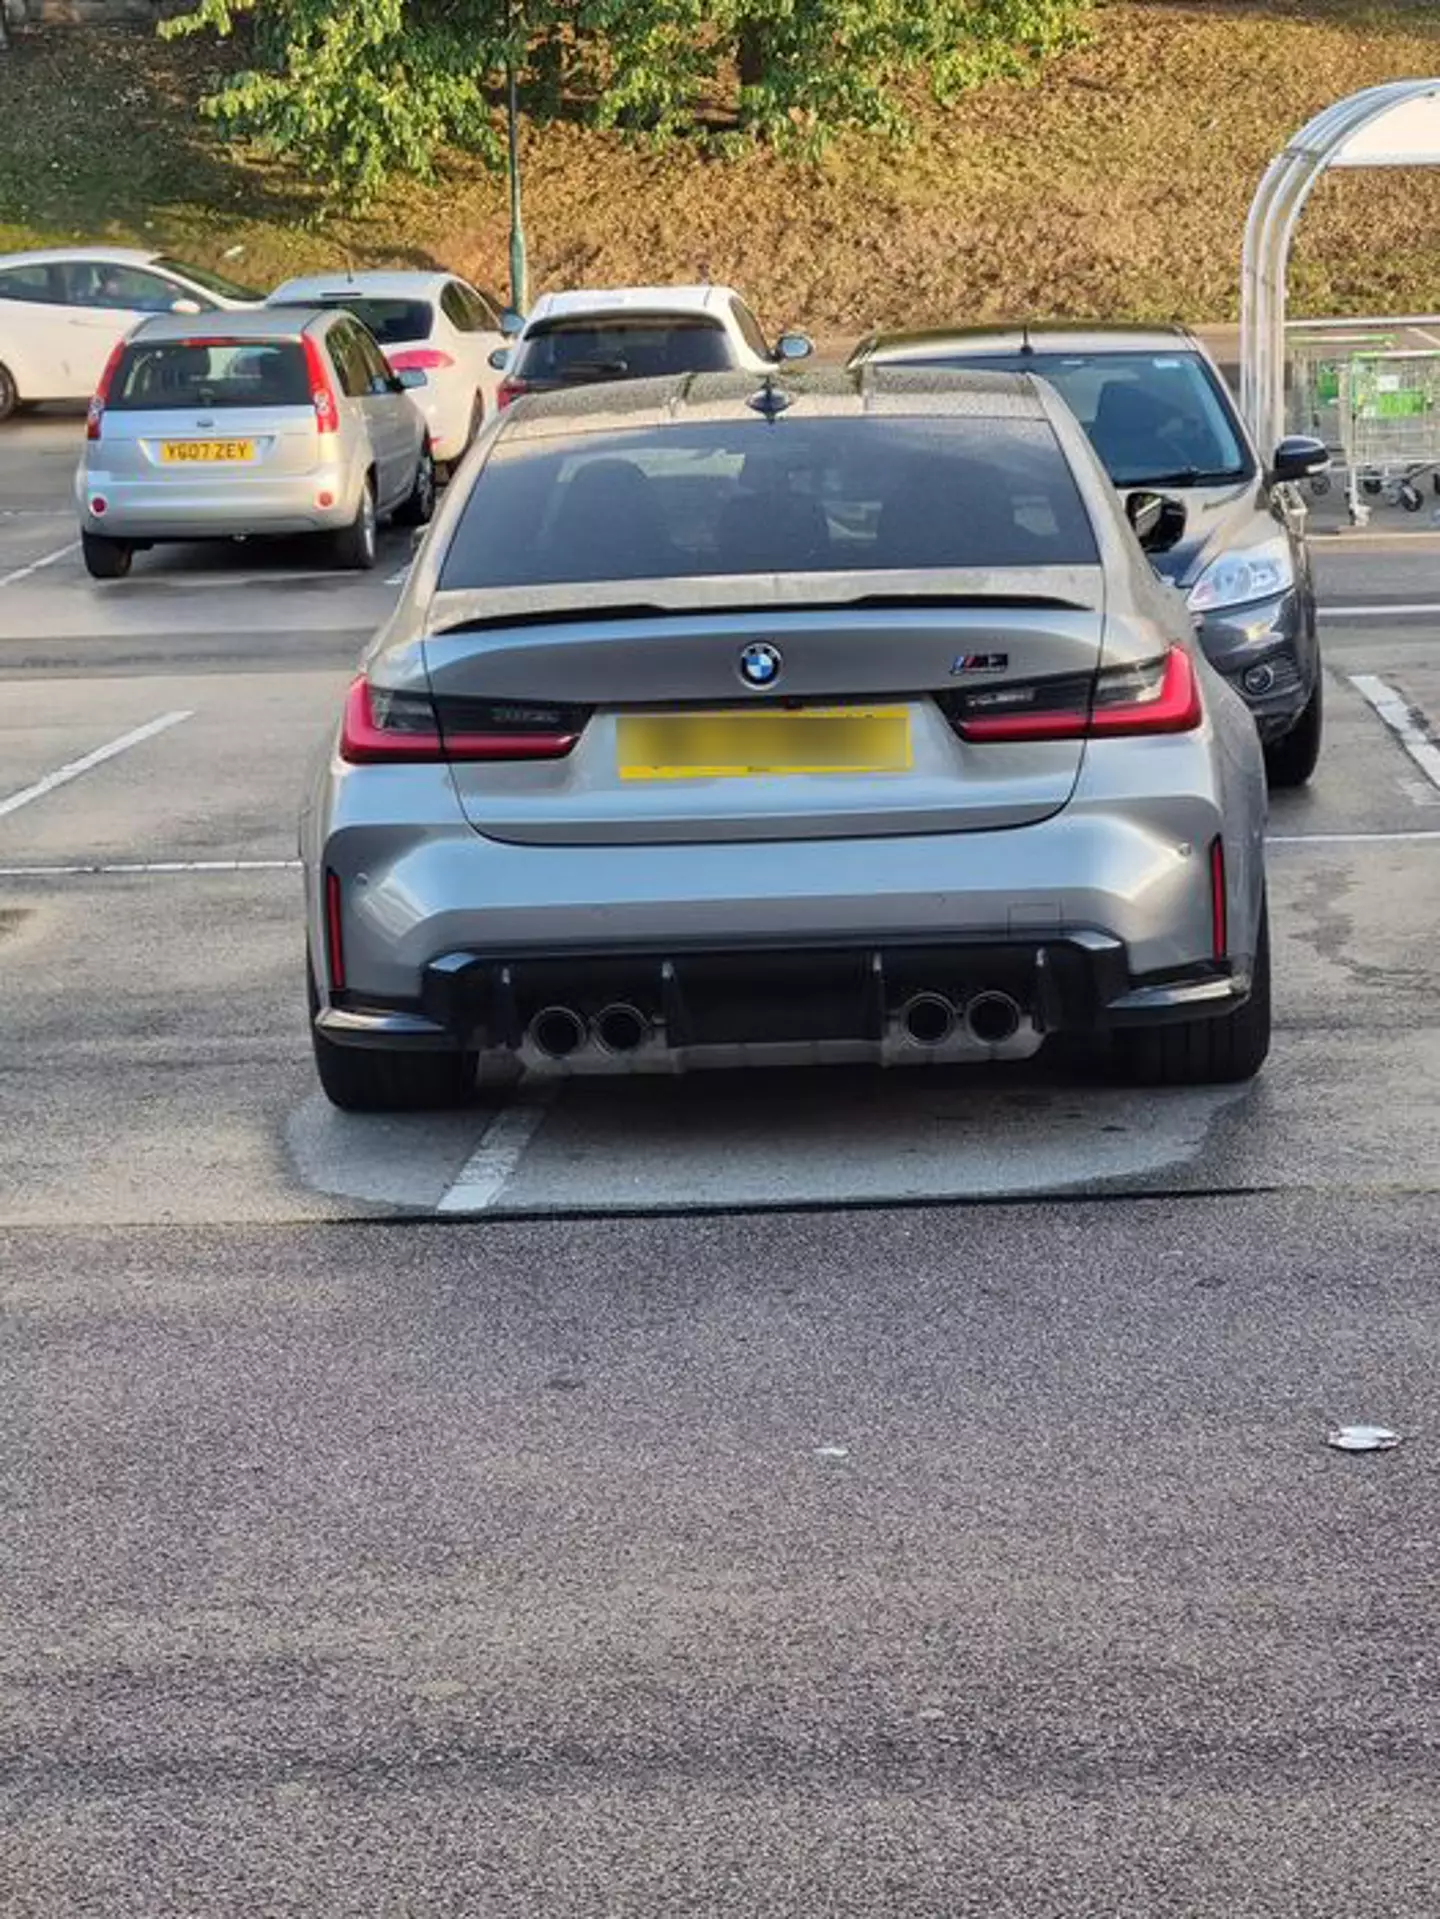 A BMW driver has been rinsed for their ‘shameless’ parking.